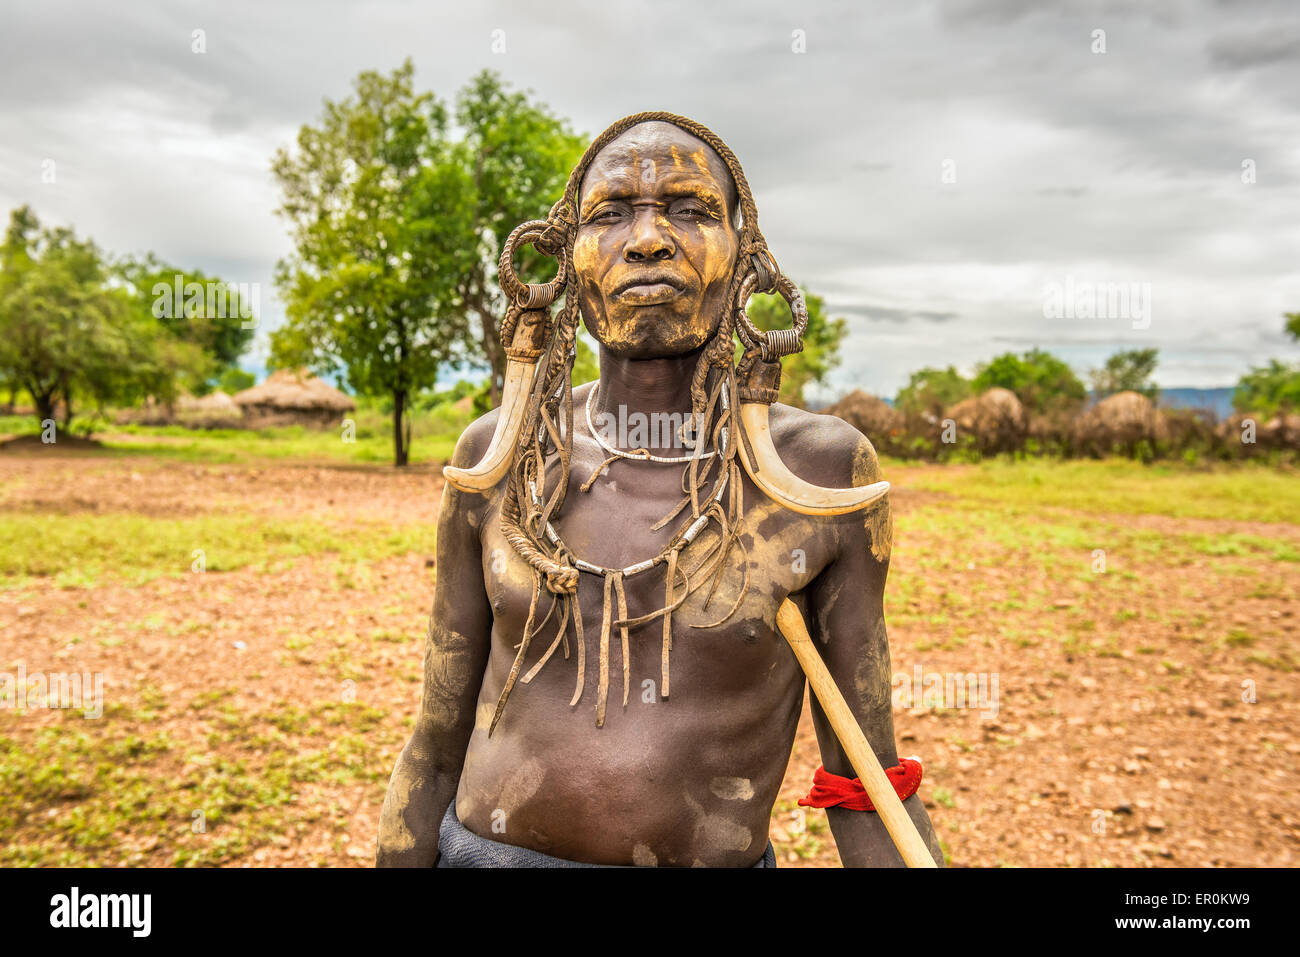 Warrior from the african tribe Mursi with traditional horns in Mago National Park, Ethiopia. Stock Photo